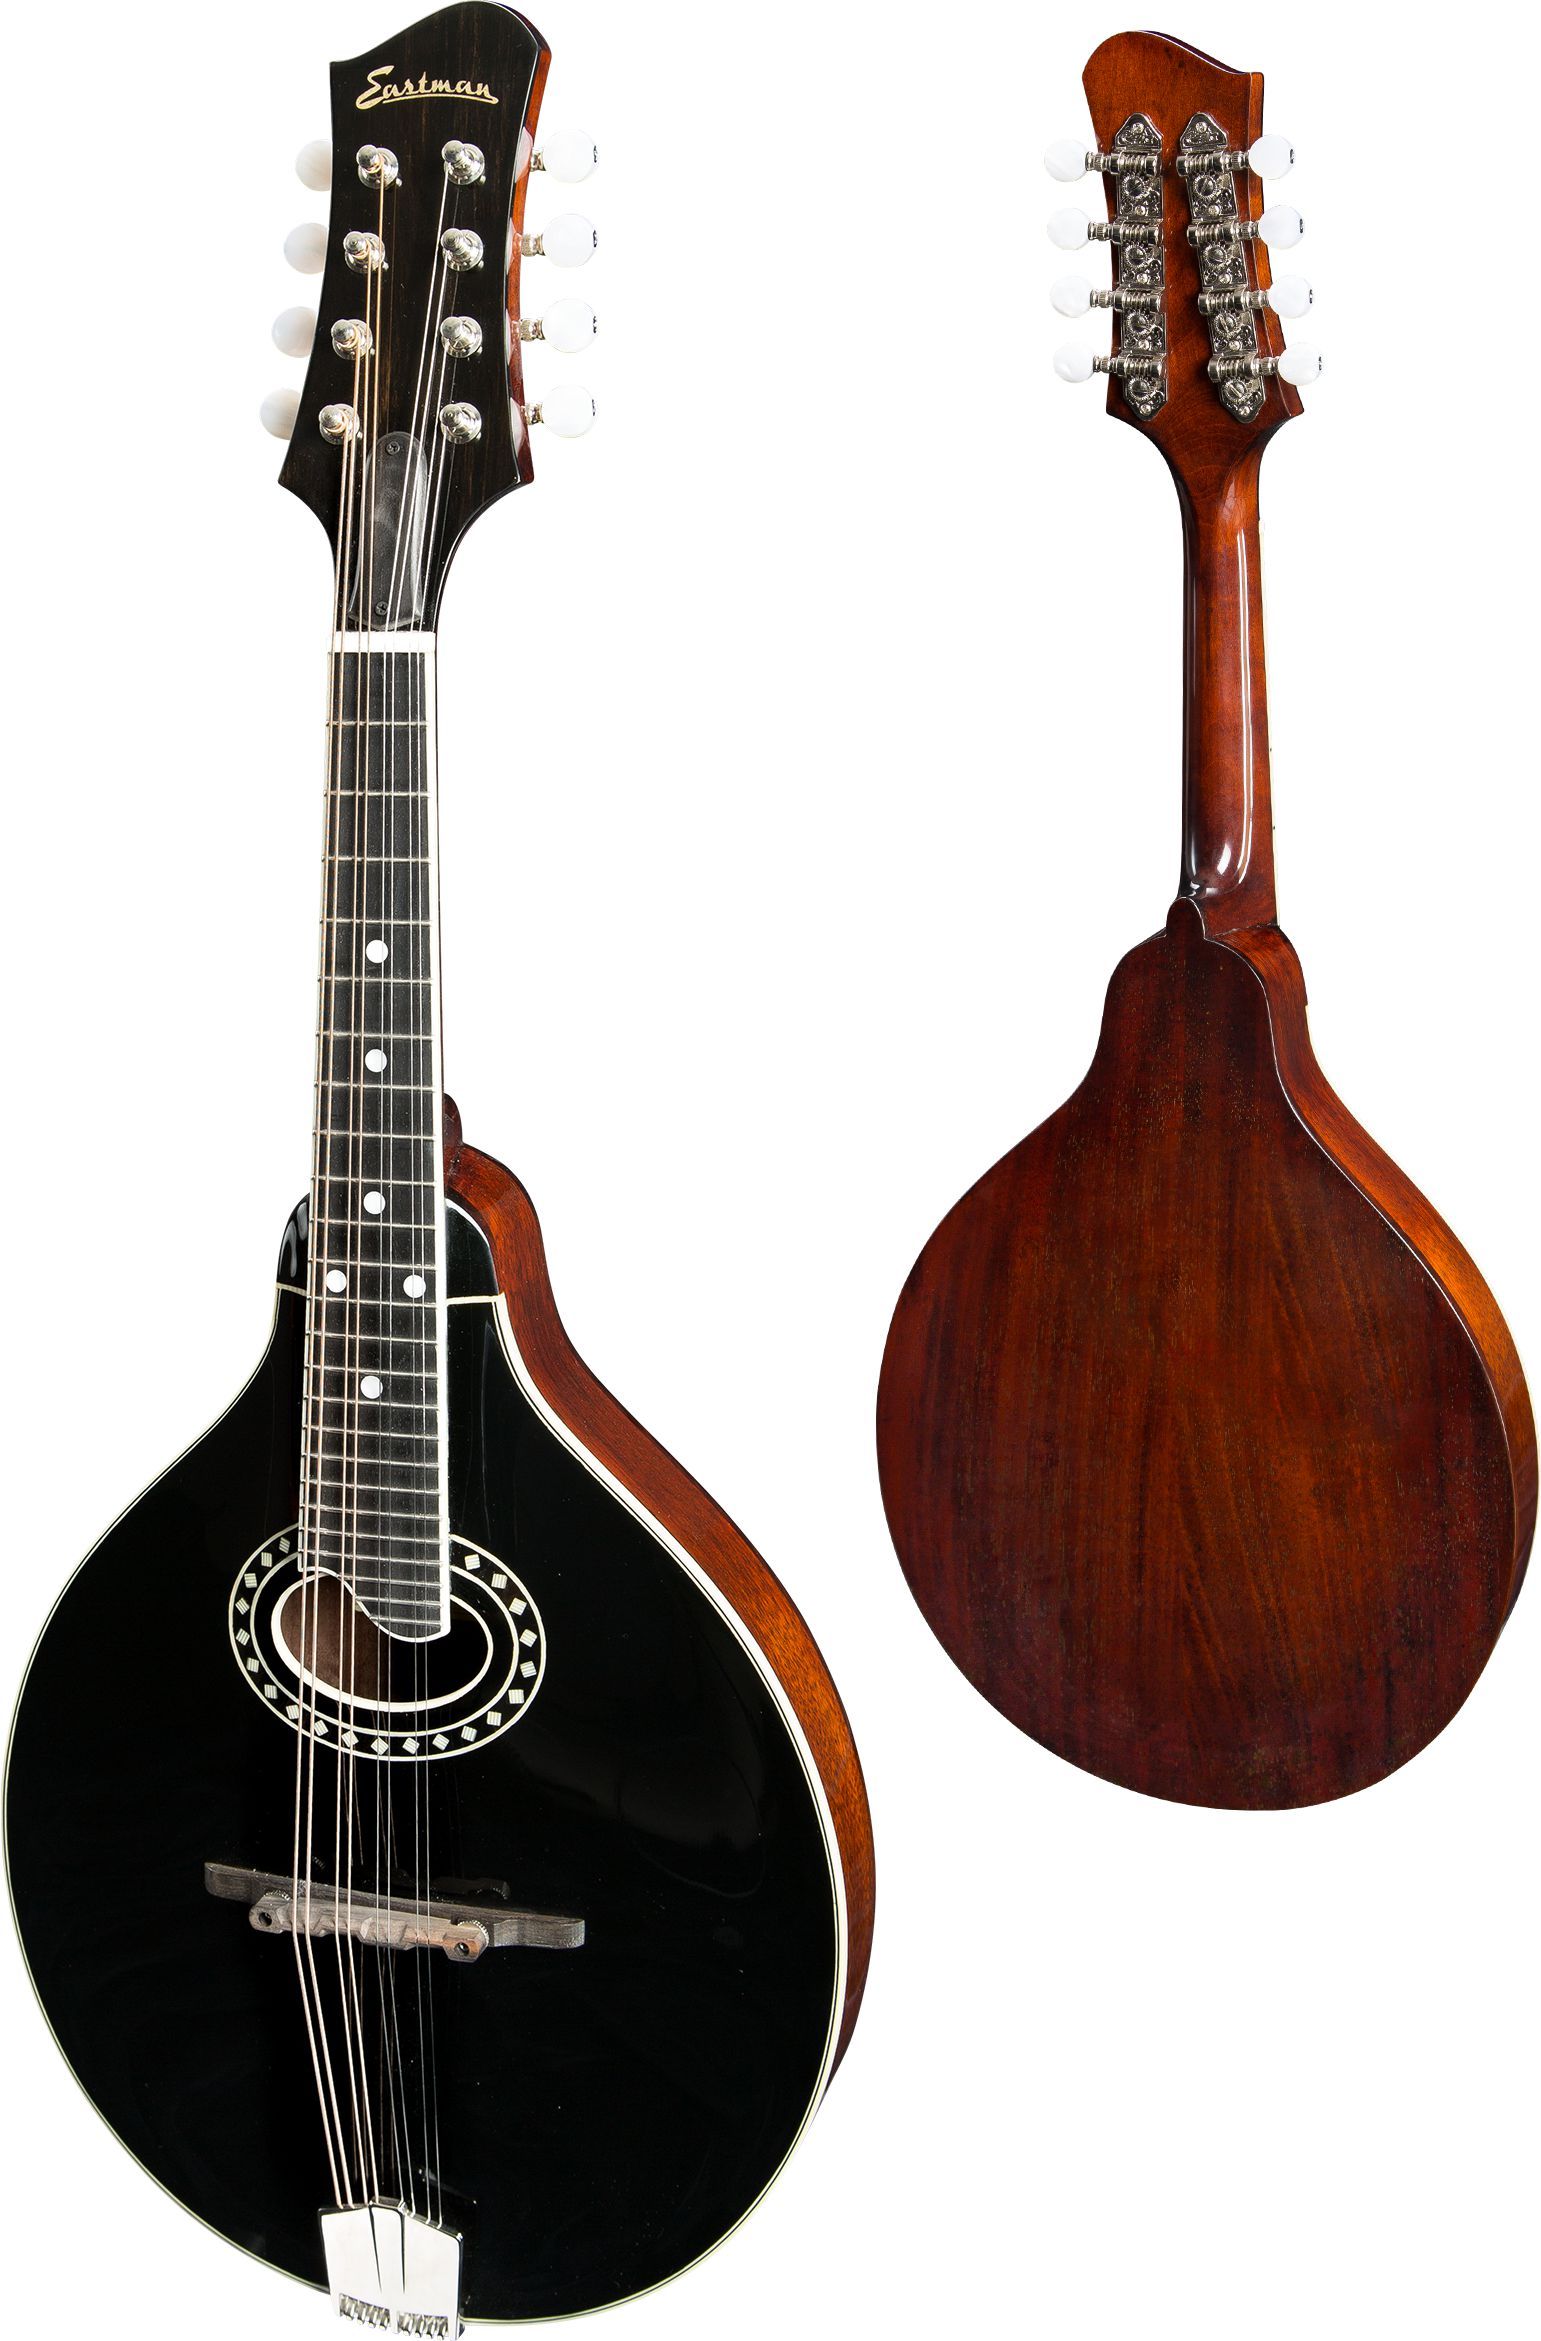 Eastman MD404-BK Black A-style Mandolin (oval hole, Solid Spruce top, Solid Mahogany back and sides, Black top, w/Case), Mandolin for sale at Richards Guitars.